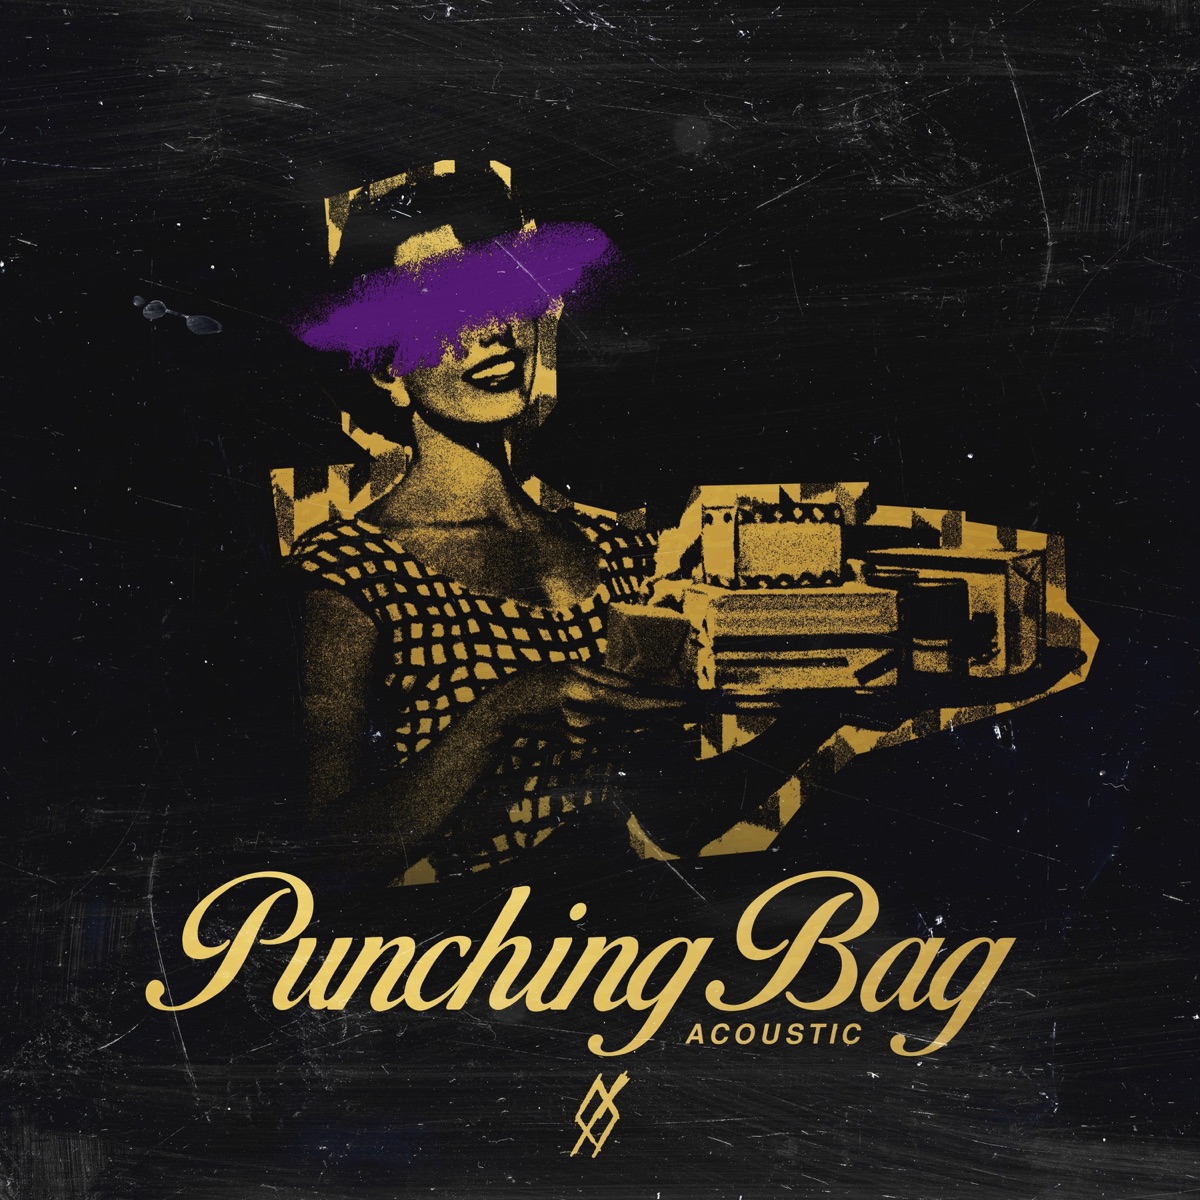 Set It Off Release First Single 'Punching Bag' As Independent Band